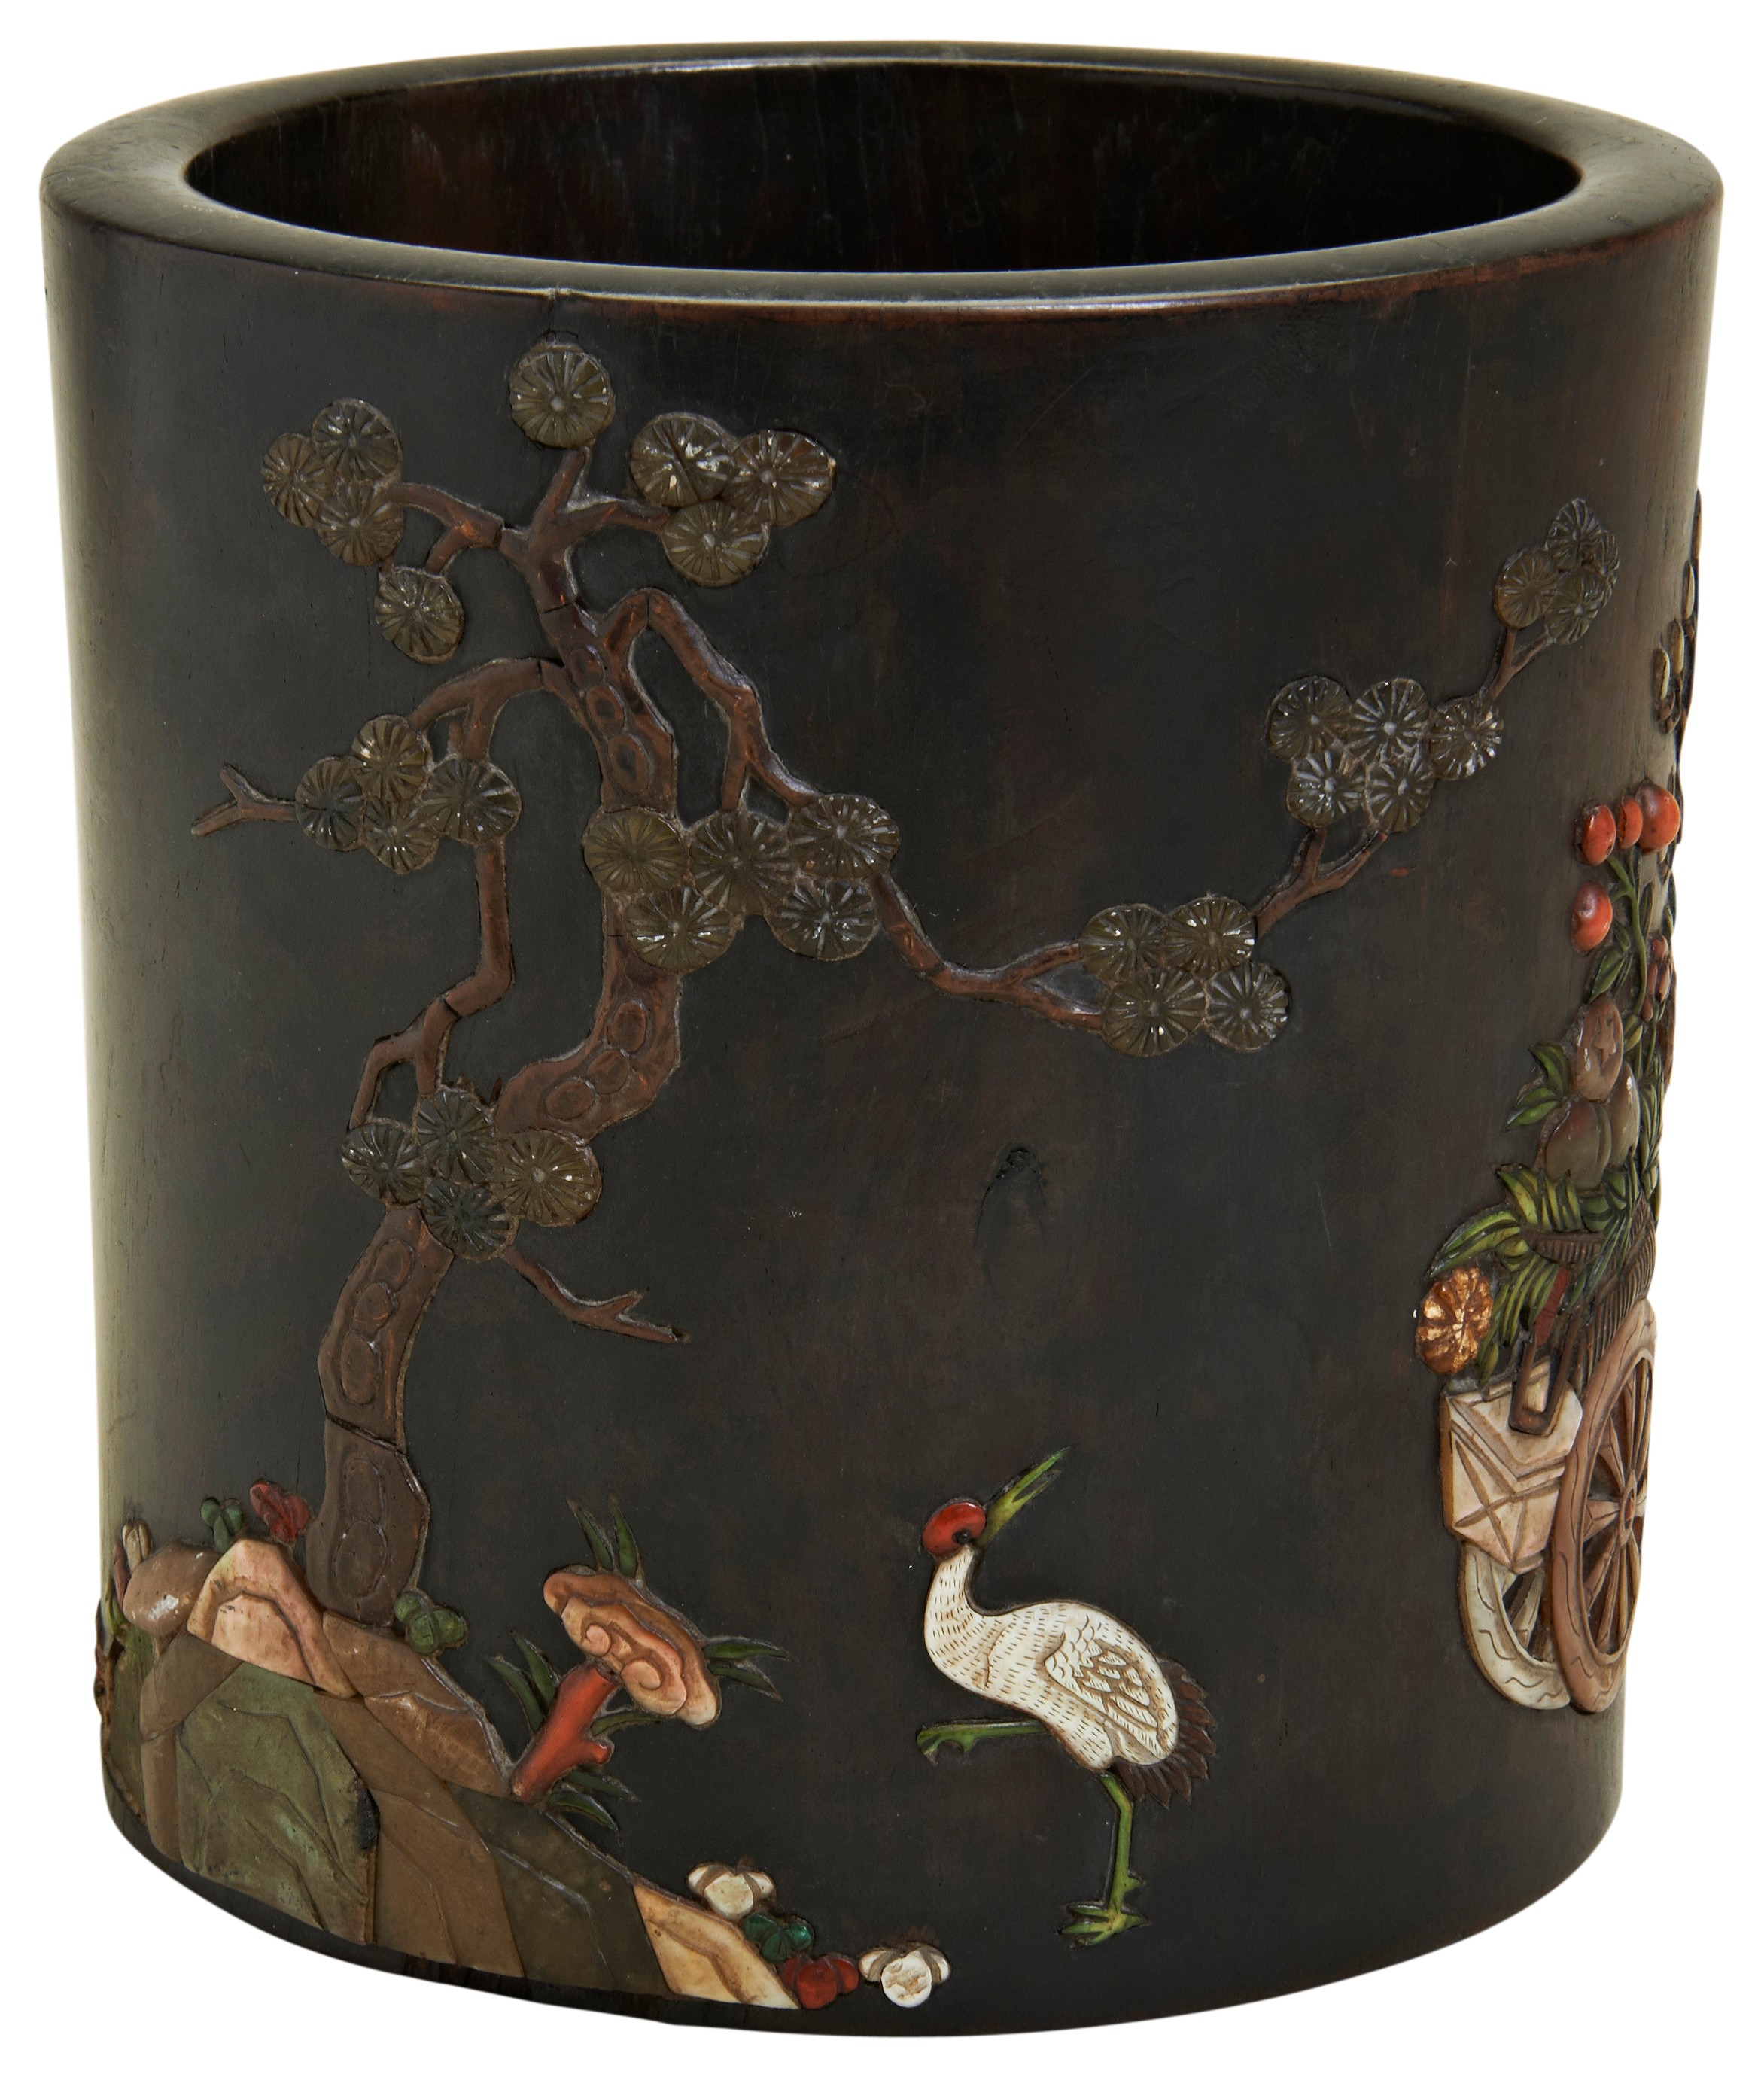 A FINE HARDWOOD AND INLAID BRUSH POT QING DYNASTY, 18TH CENTURY 清 百宝嵌紫檀笔筒 the cylindrical sides - Bild 2 aus 2